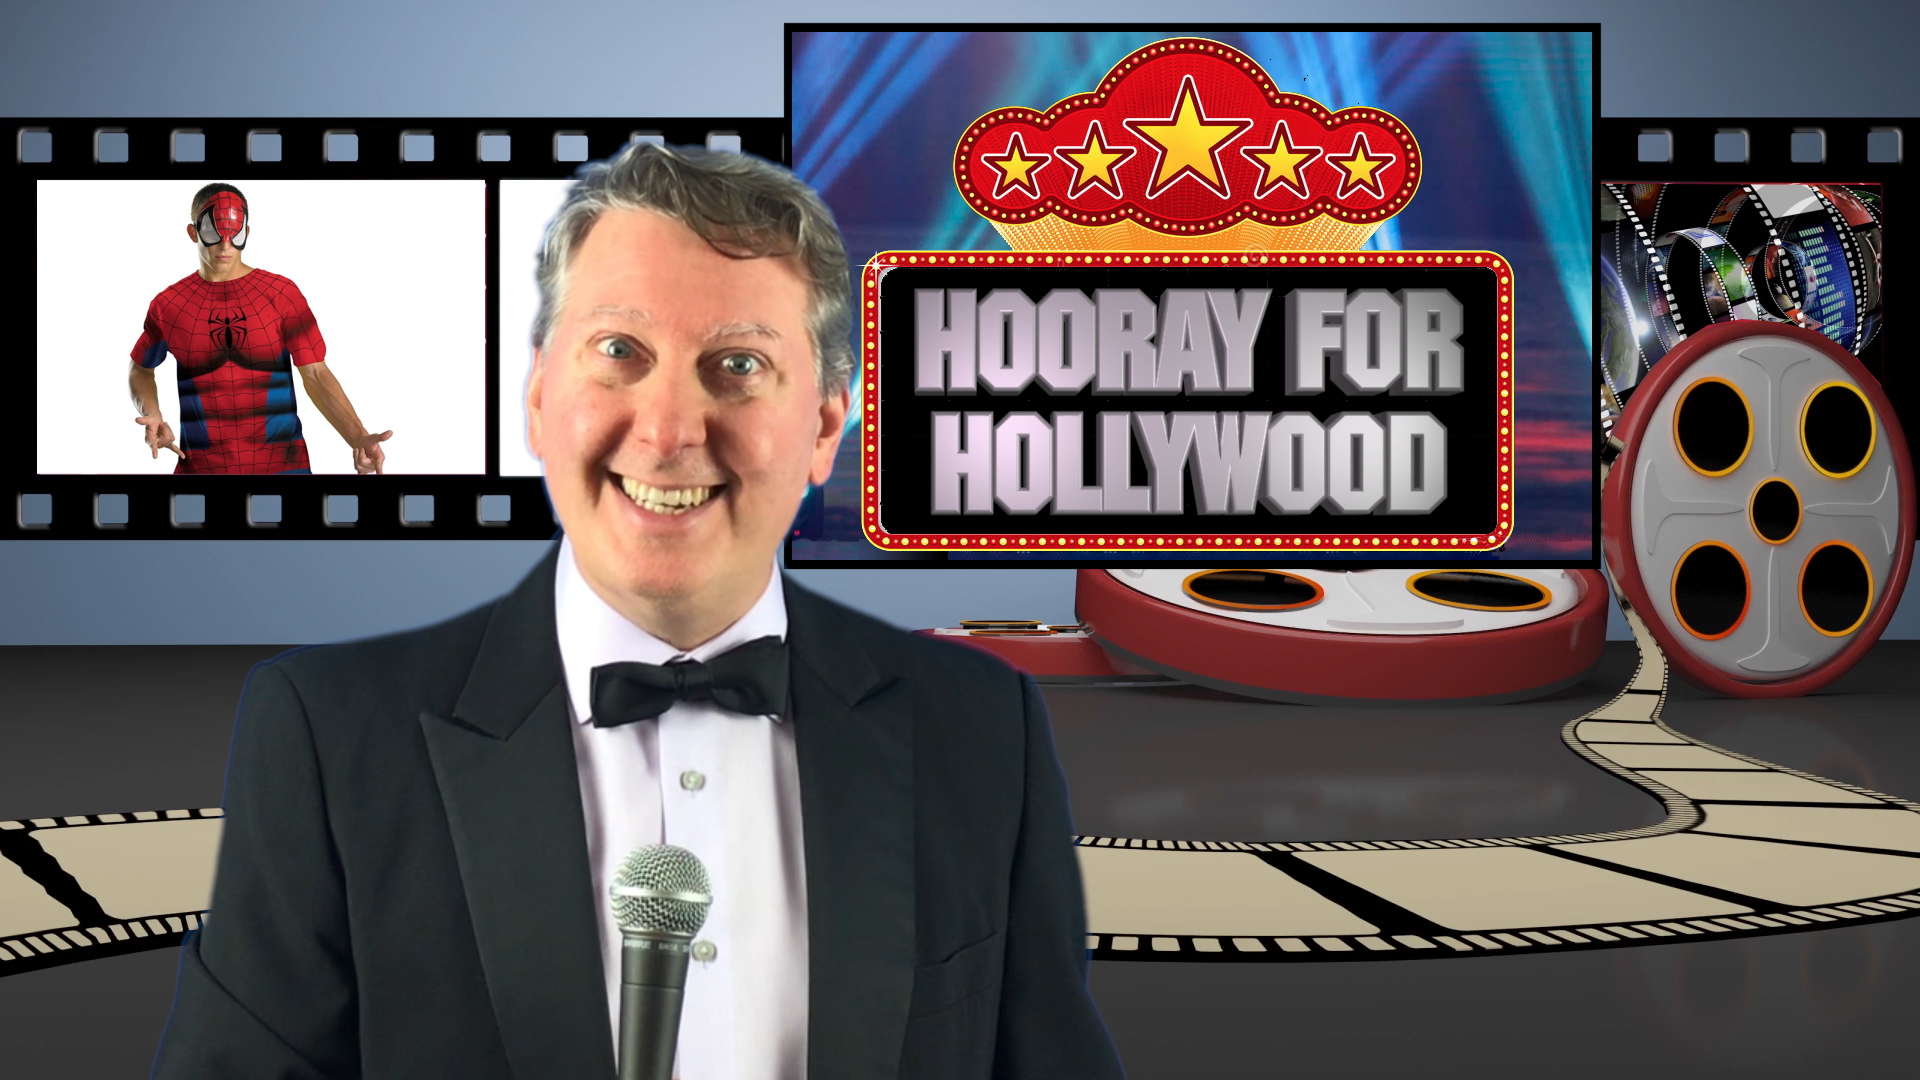 Hooby for hollywood.